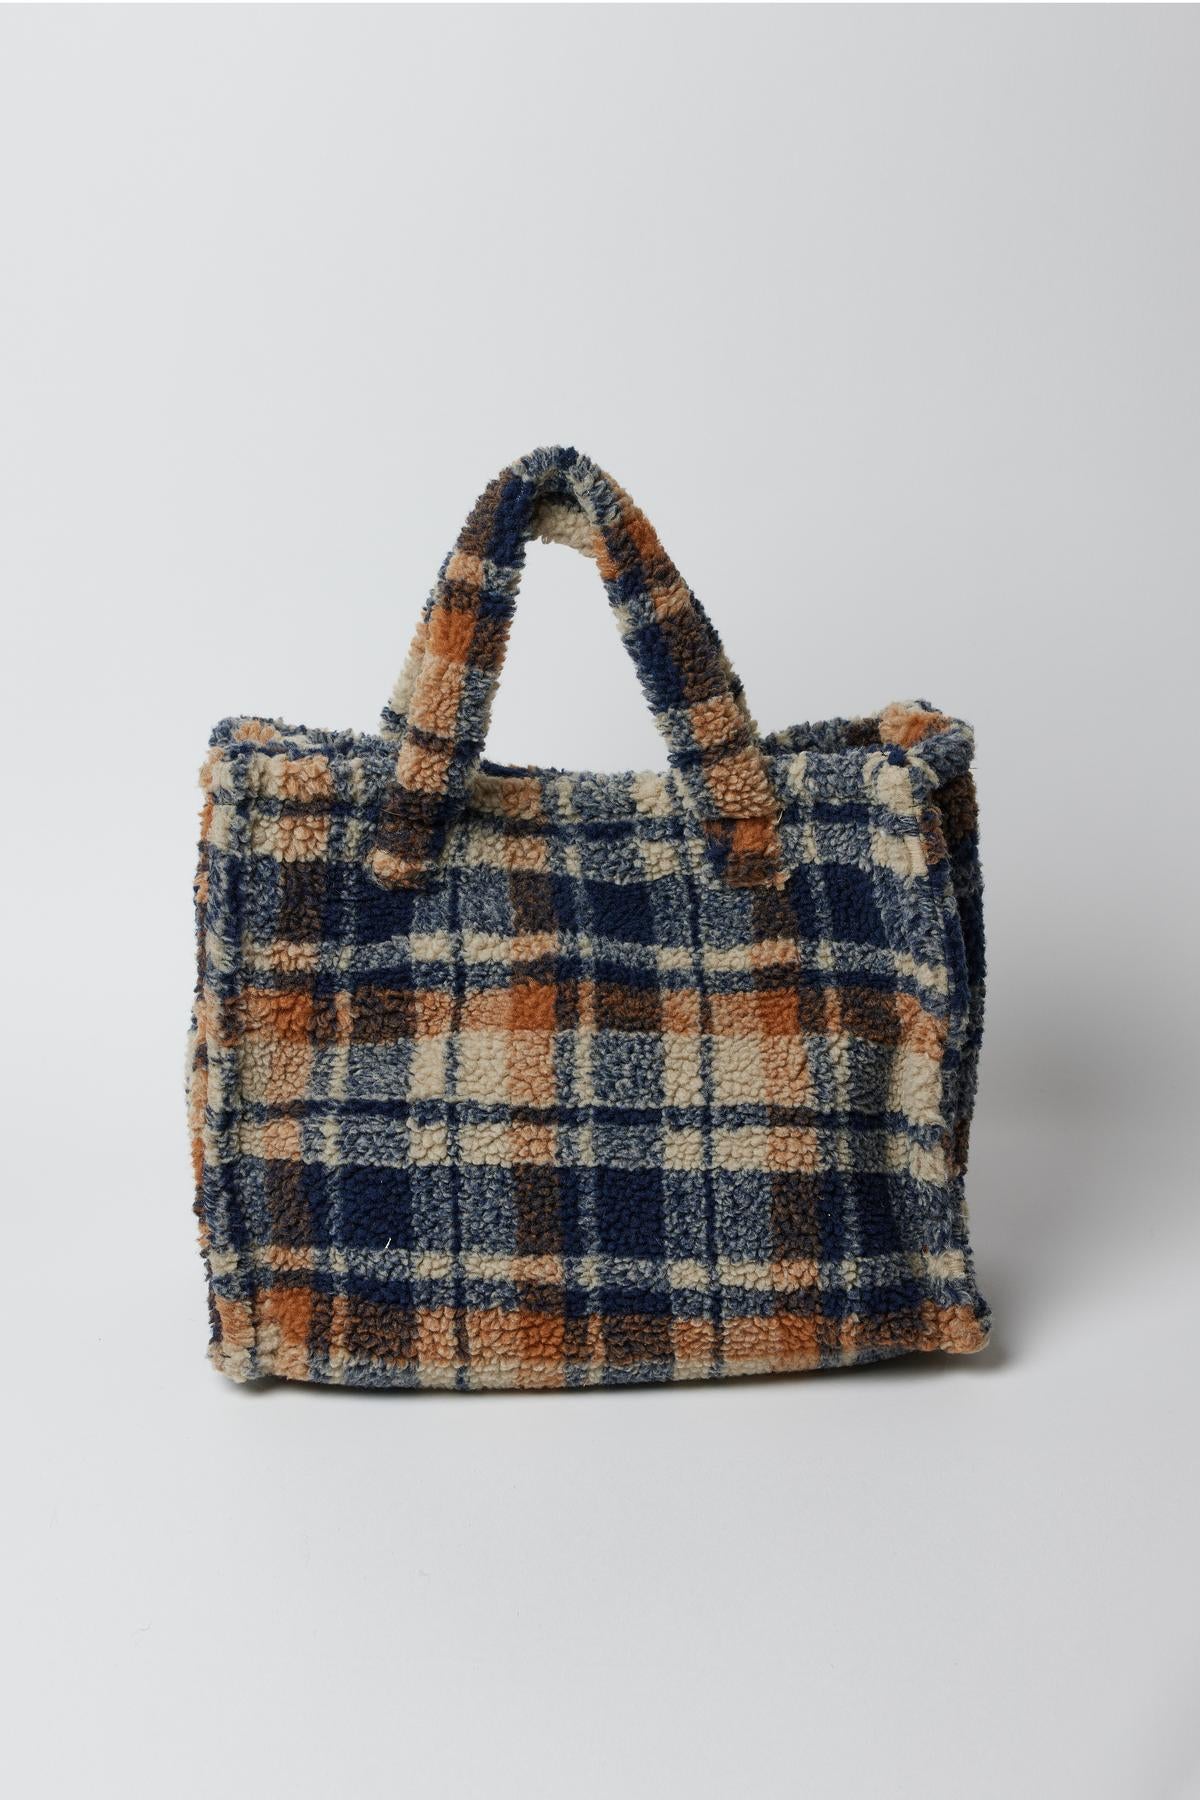   A blue and orange cold-weather SMALL TEDDY TOTE duffle bag by Velvet by Graham & Spencer on a white surface. 